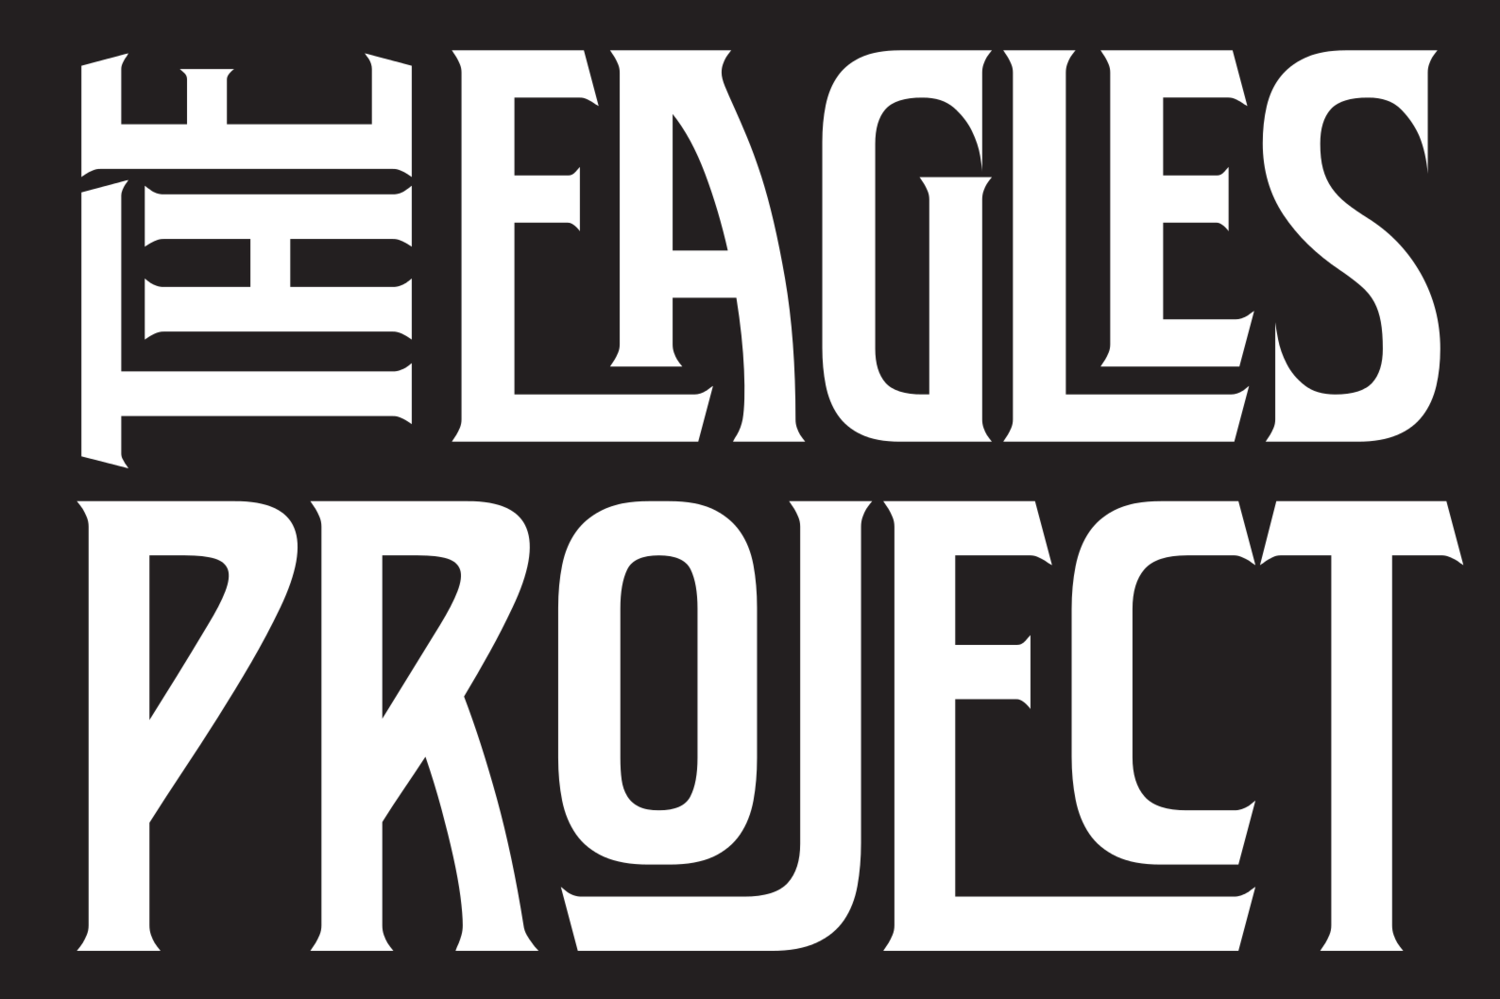 The Eagles Project